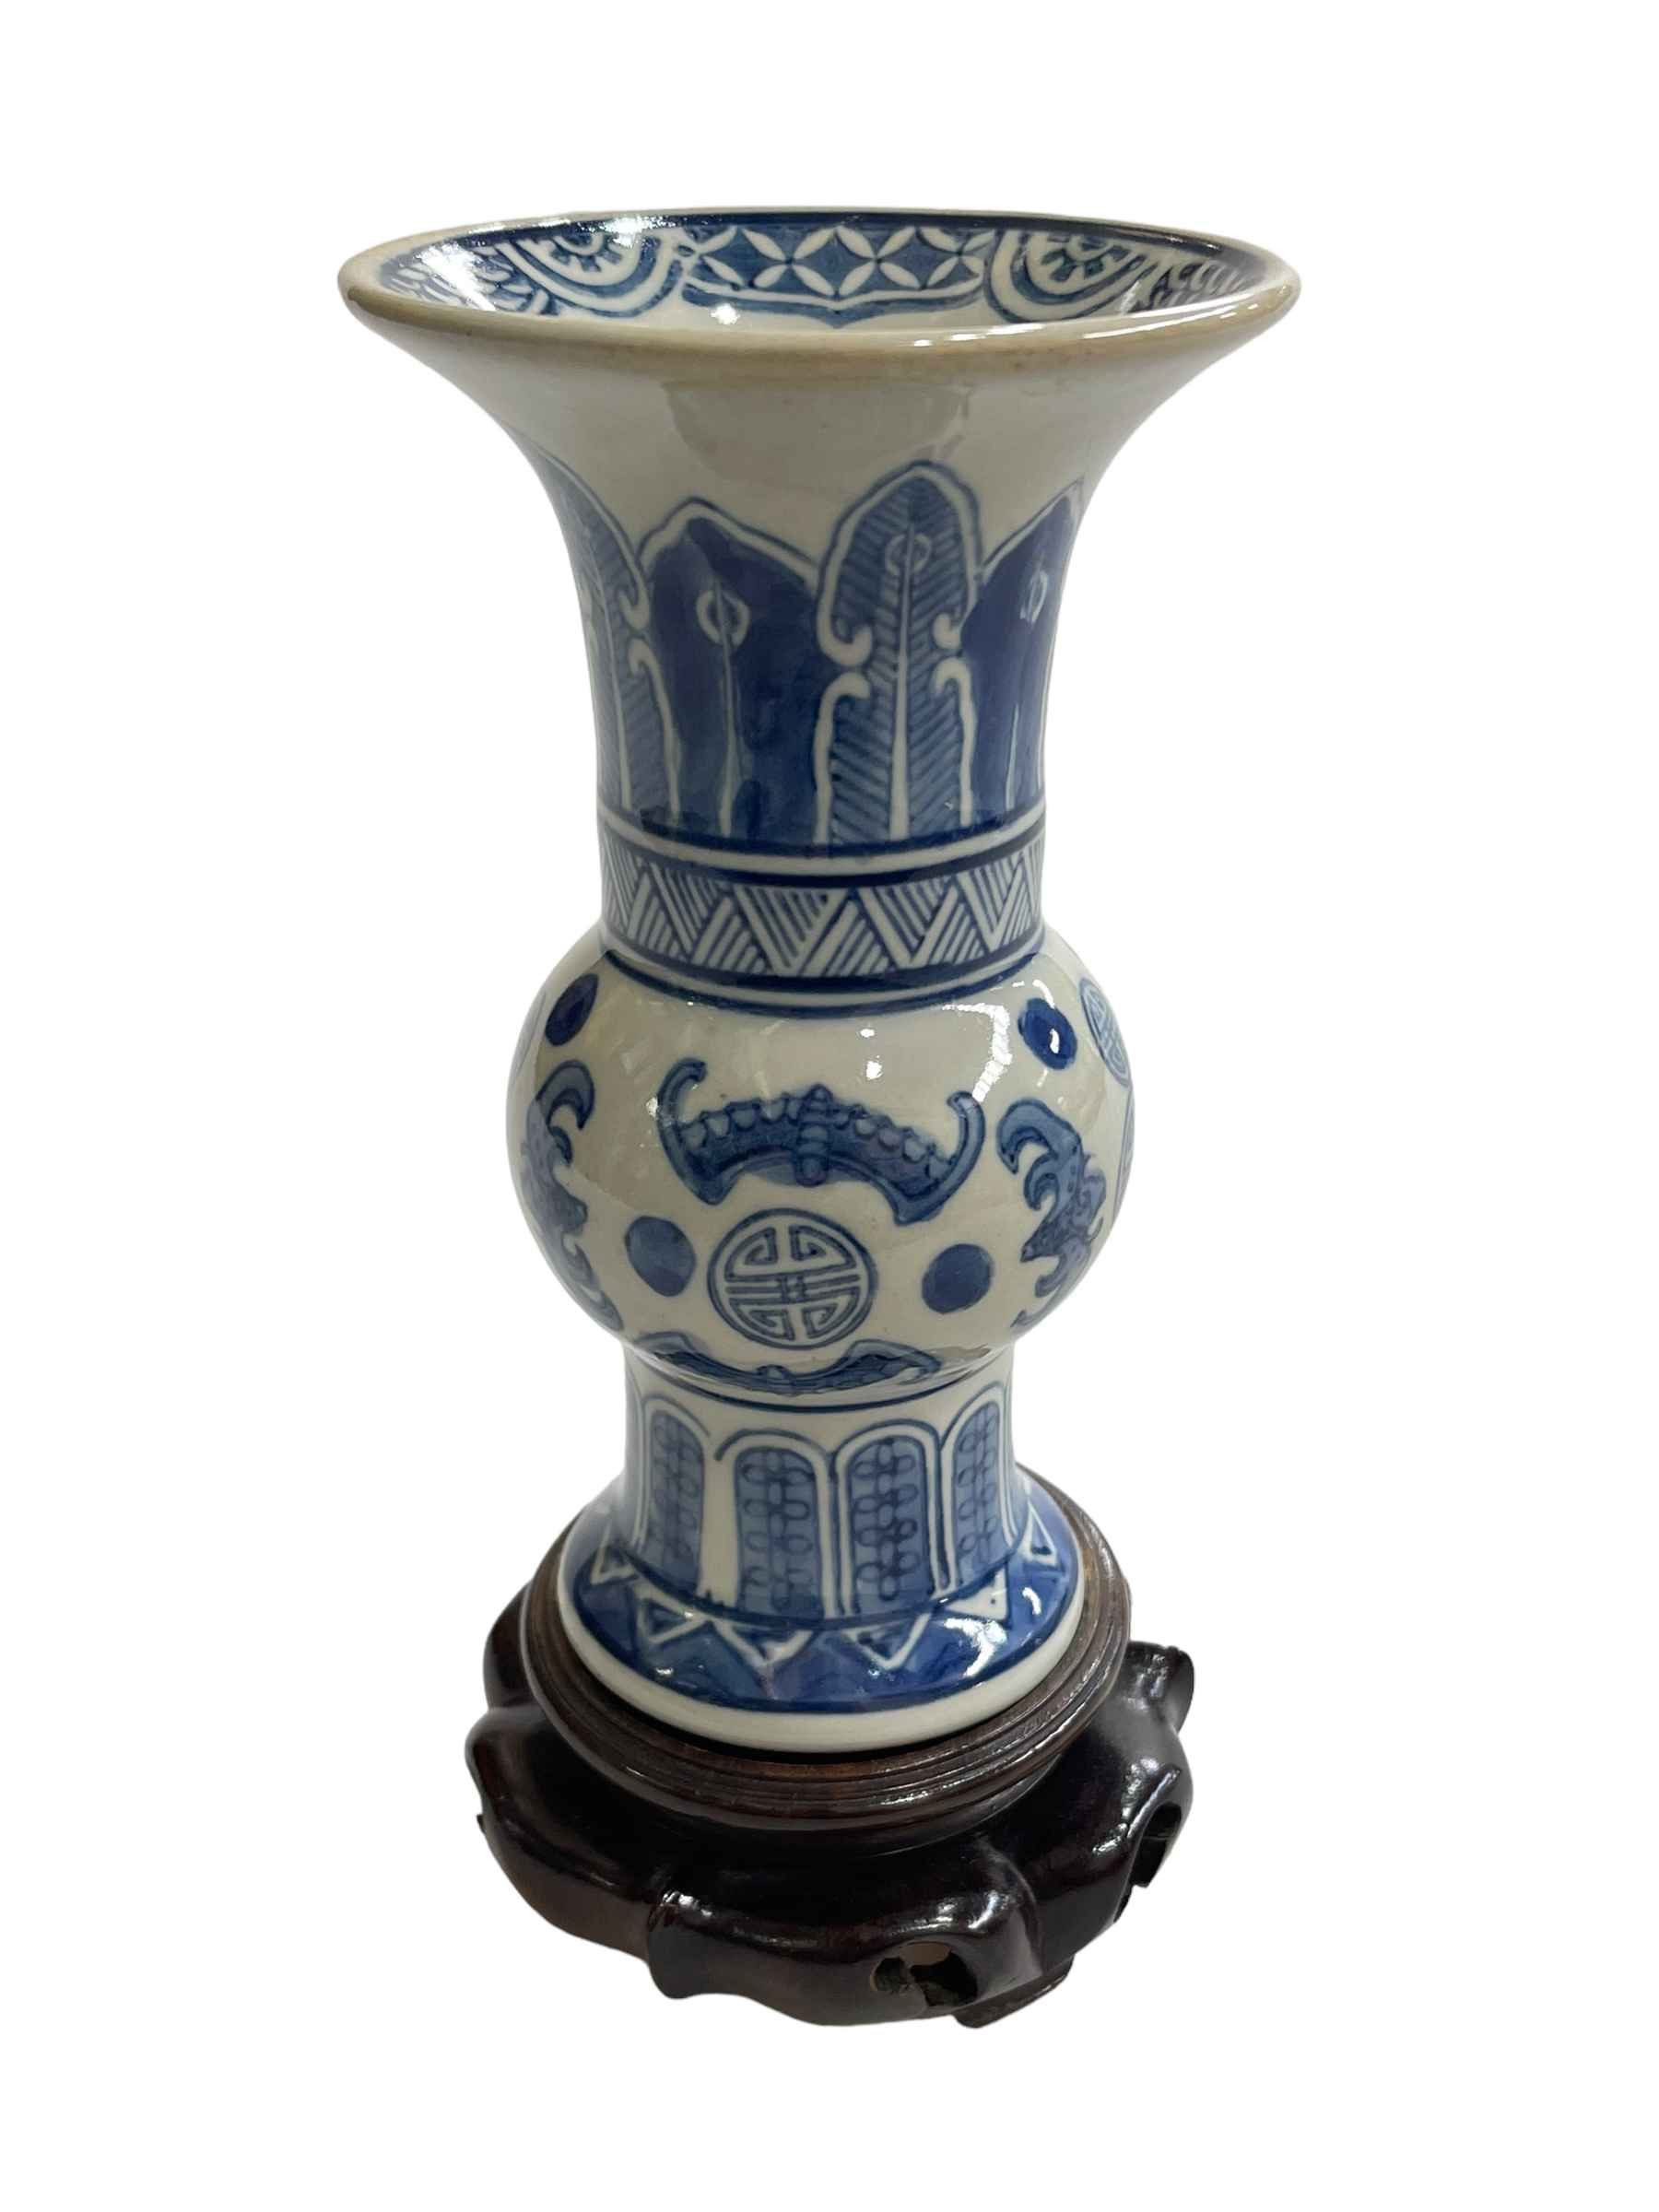 Chinese porcelain vase decorated with bats and symmetrical pattern, on wood stand, 19cm.